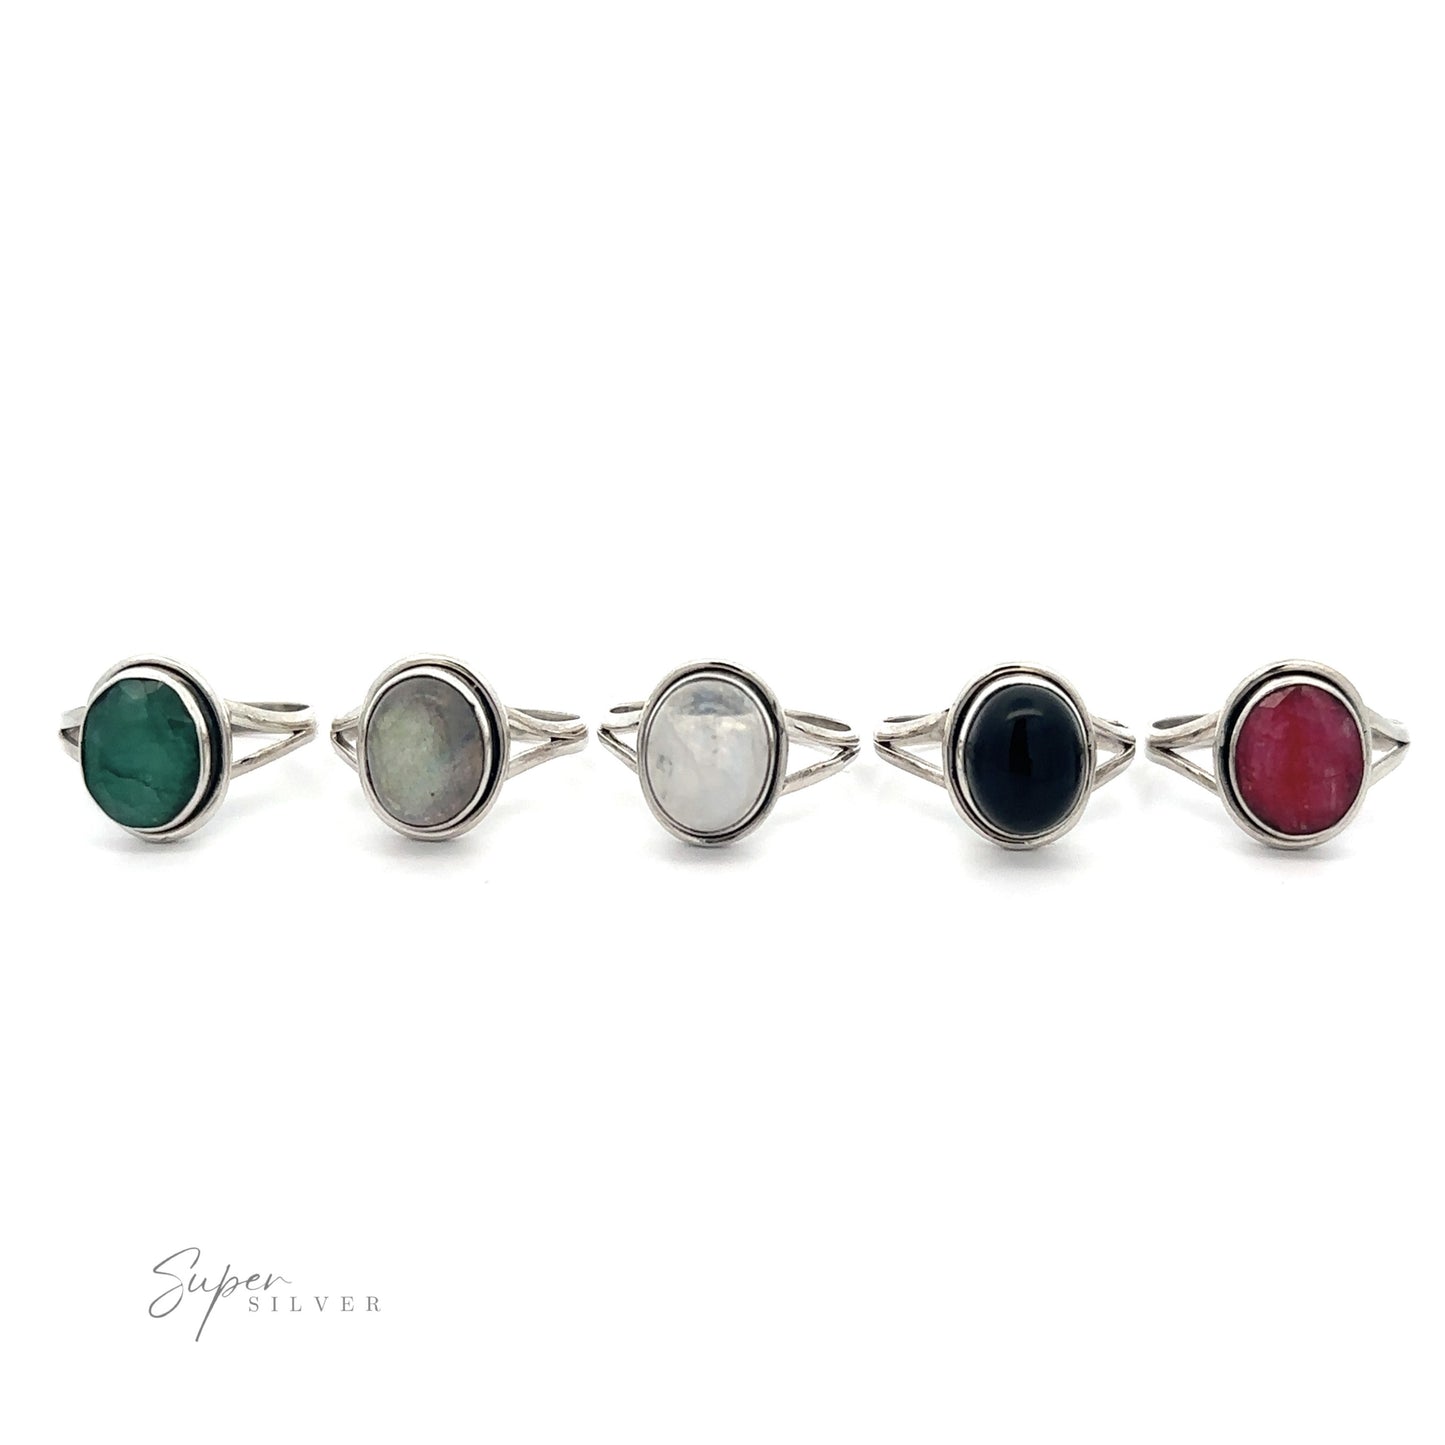 A collection of five Oval Split Shank Stone Rings with various colored gemstones including moonstone and emerald, displayed in a line against a white background.